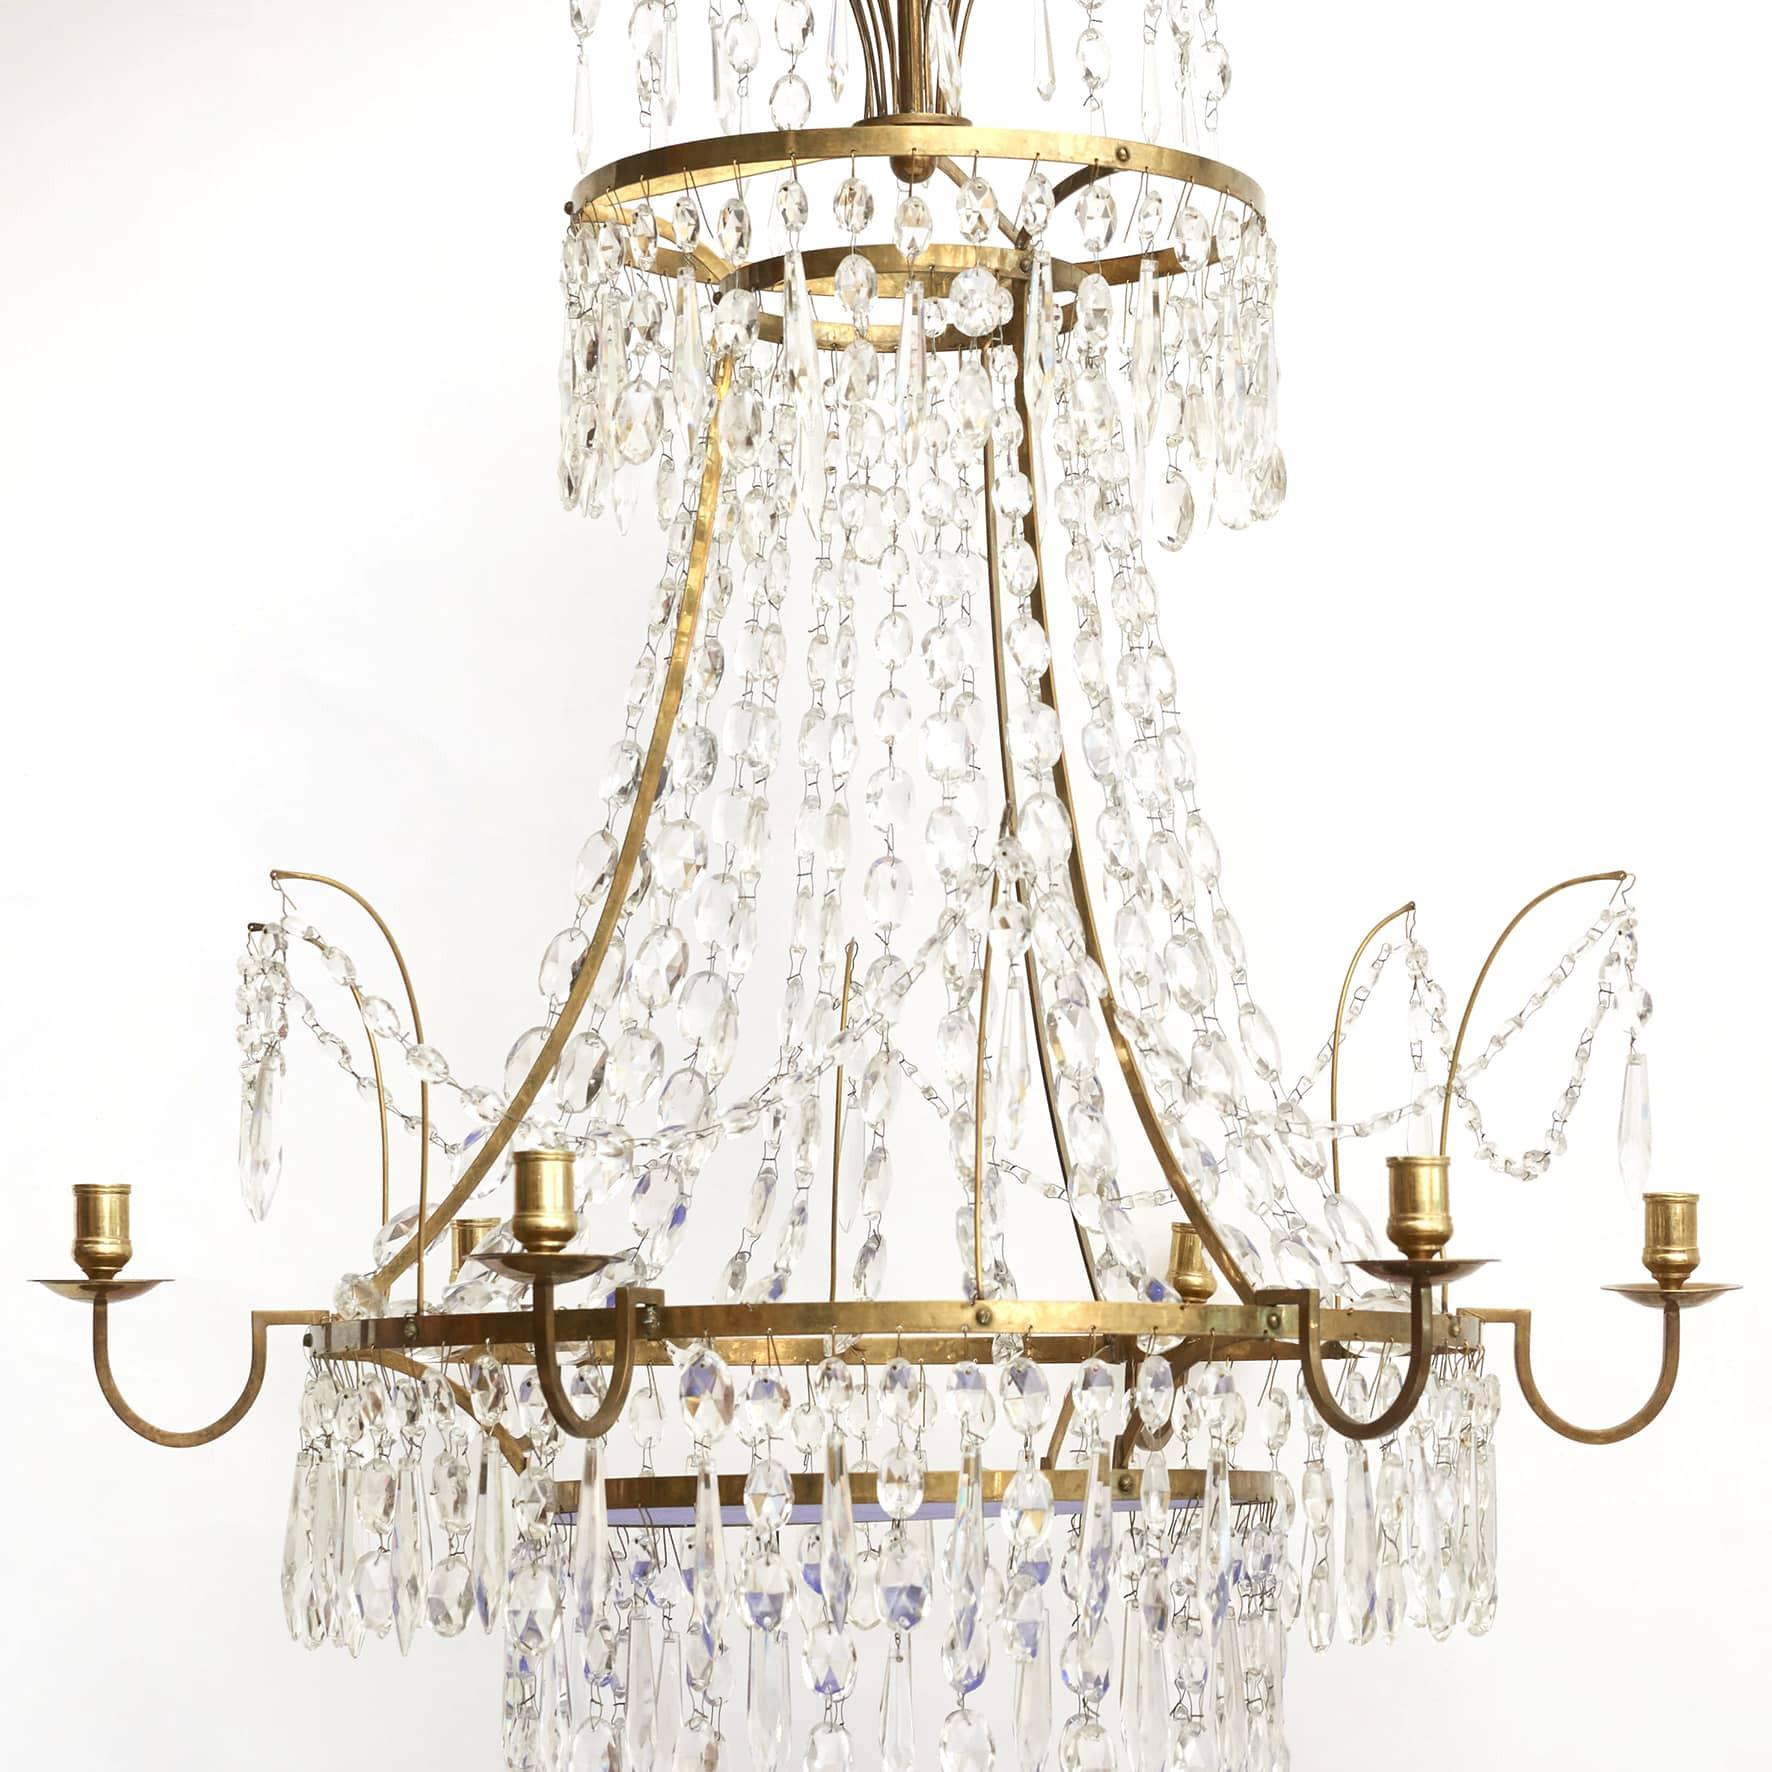 Crystal chandelier Louis XVI Style.
6 Arm Crystal Chandelier with Brass frame.

Prisms with blue glass bottom.
Copenhagen approx. 1900.
 